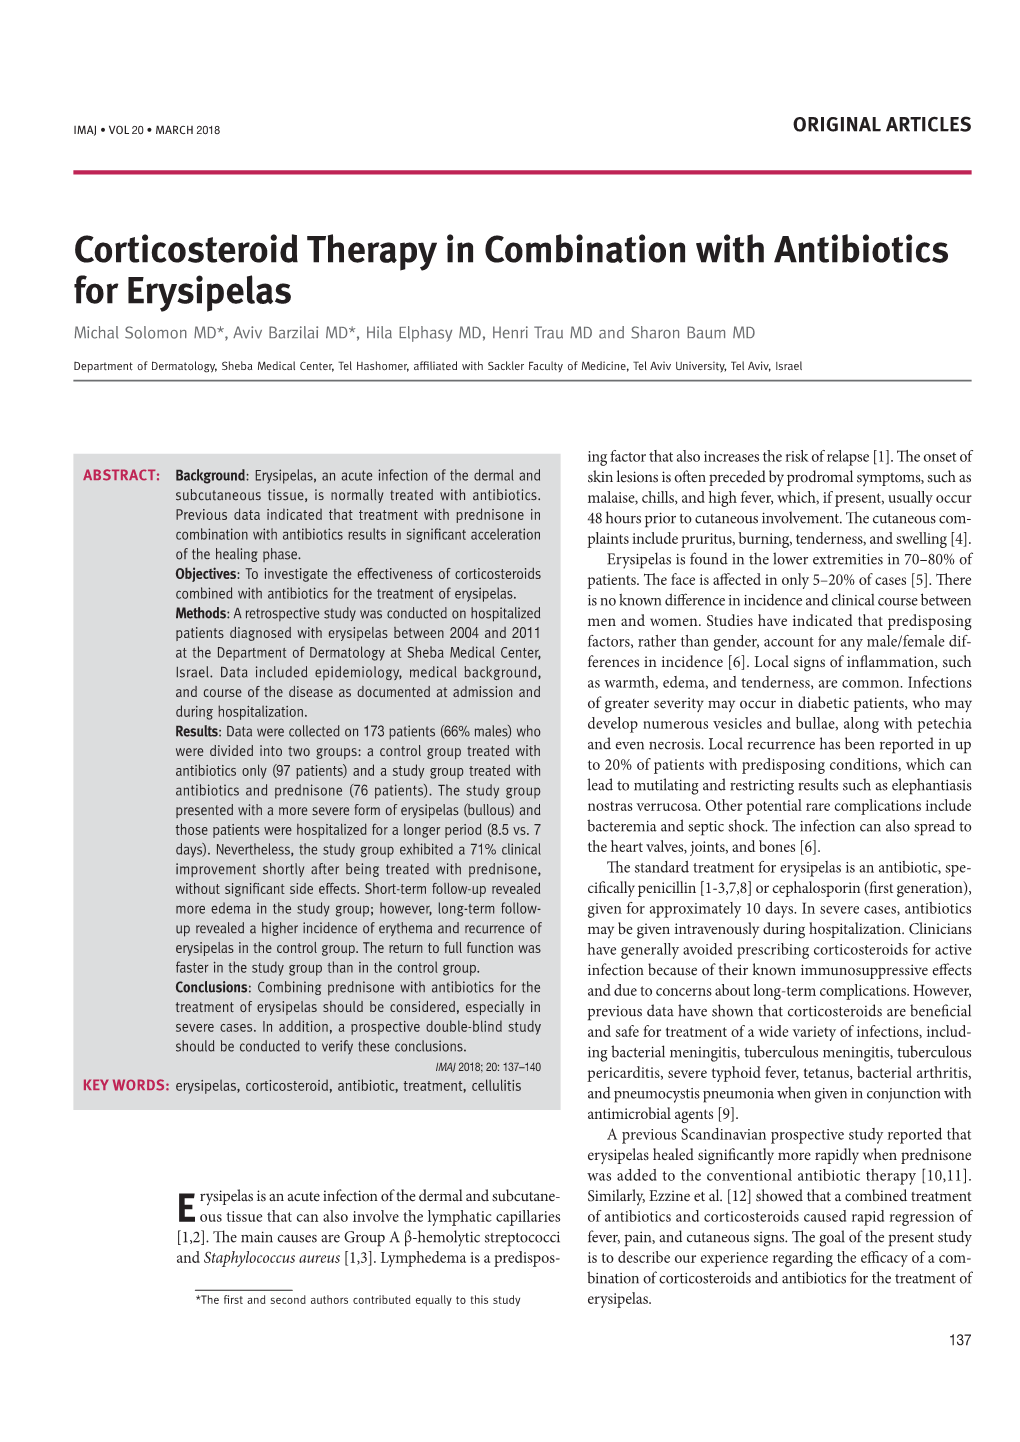 Corticosteroid Therapy in Combination with Antibiotics for Erysipelas Michal Solomon MD*, Aviv Barzilai MD*, Hila Elphasy MD, Henri Trau MD and Sharon Baum MD